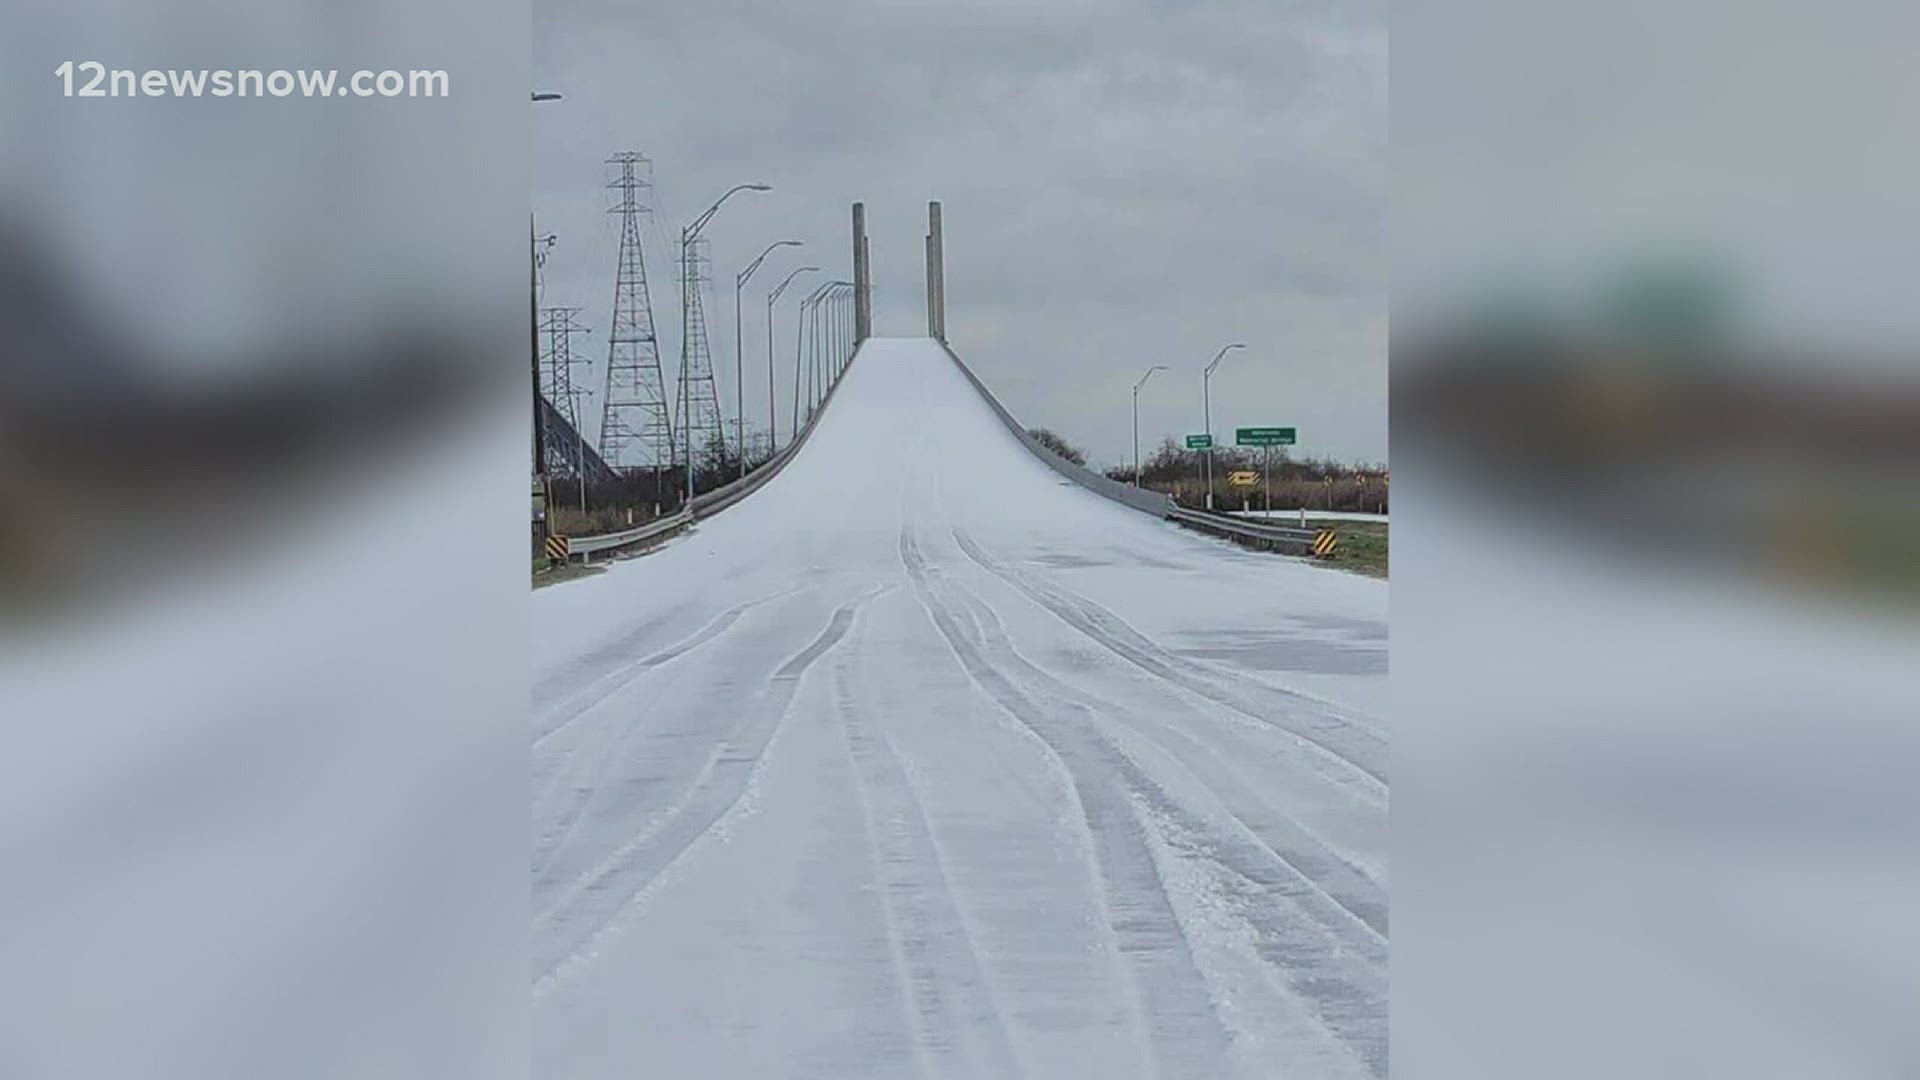 Rainbow Bridge reopens, other major bridges remain closed by snow and ice